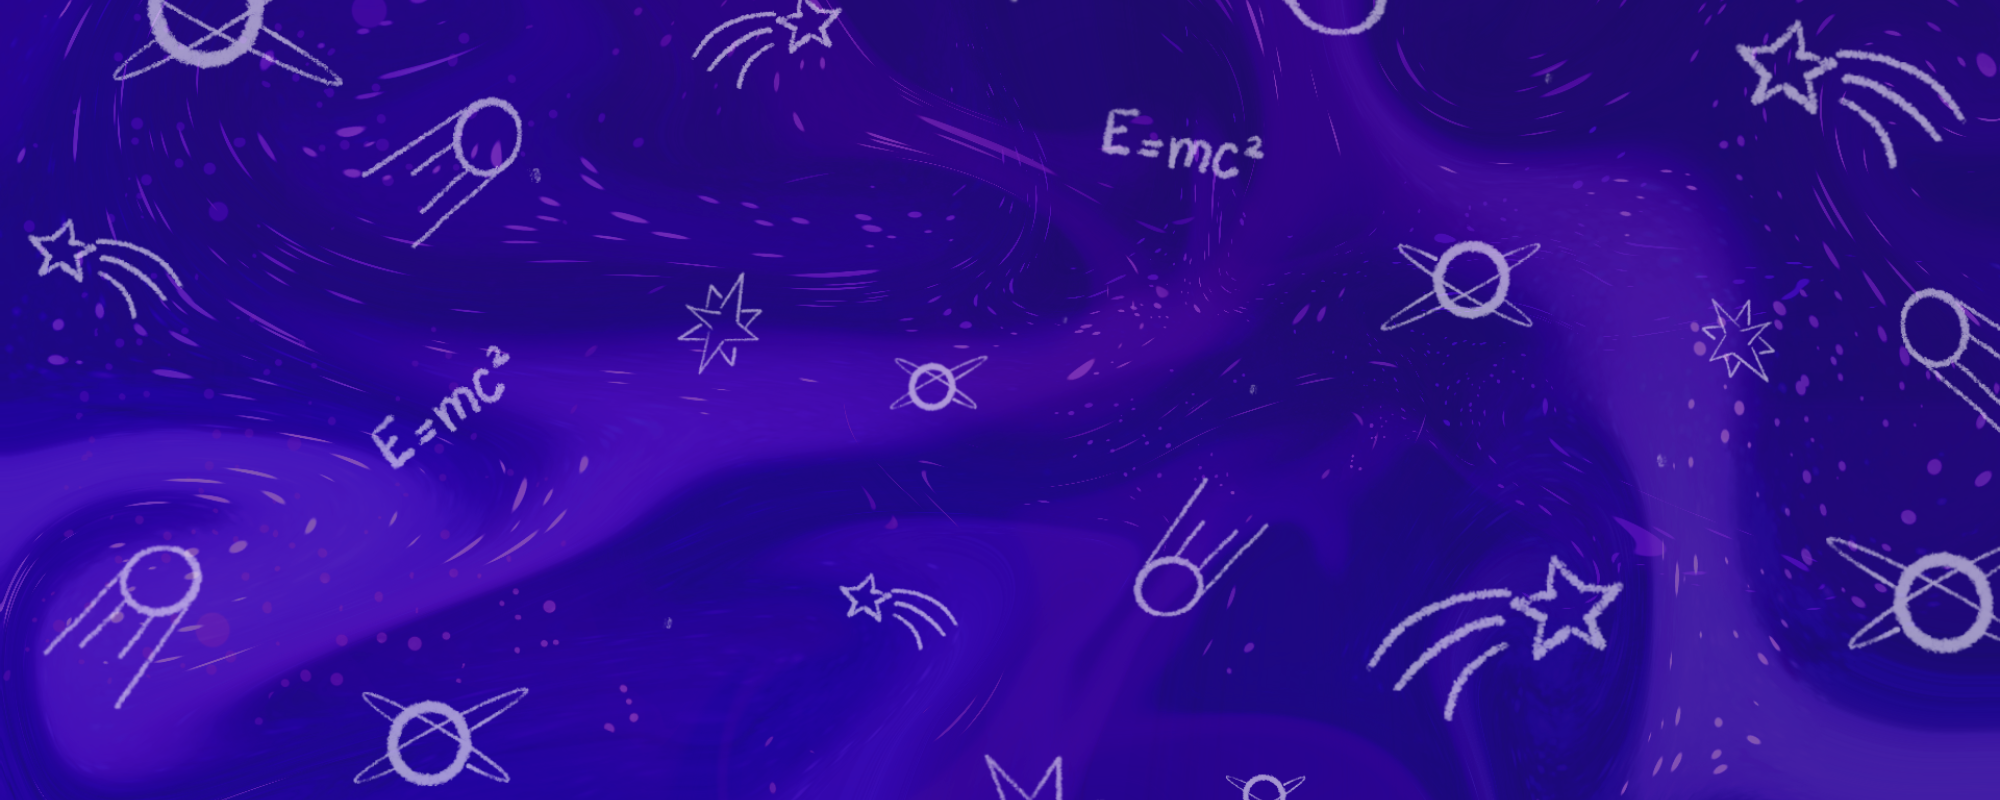 Image of purple pattern with mathematical equations